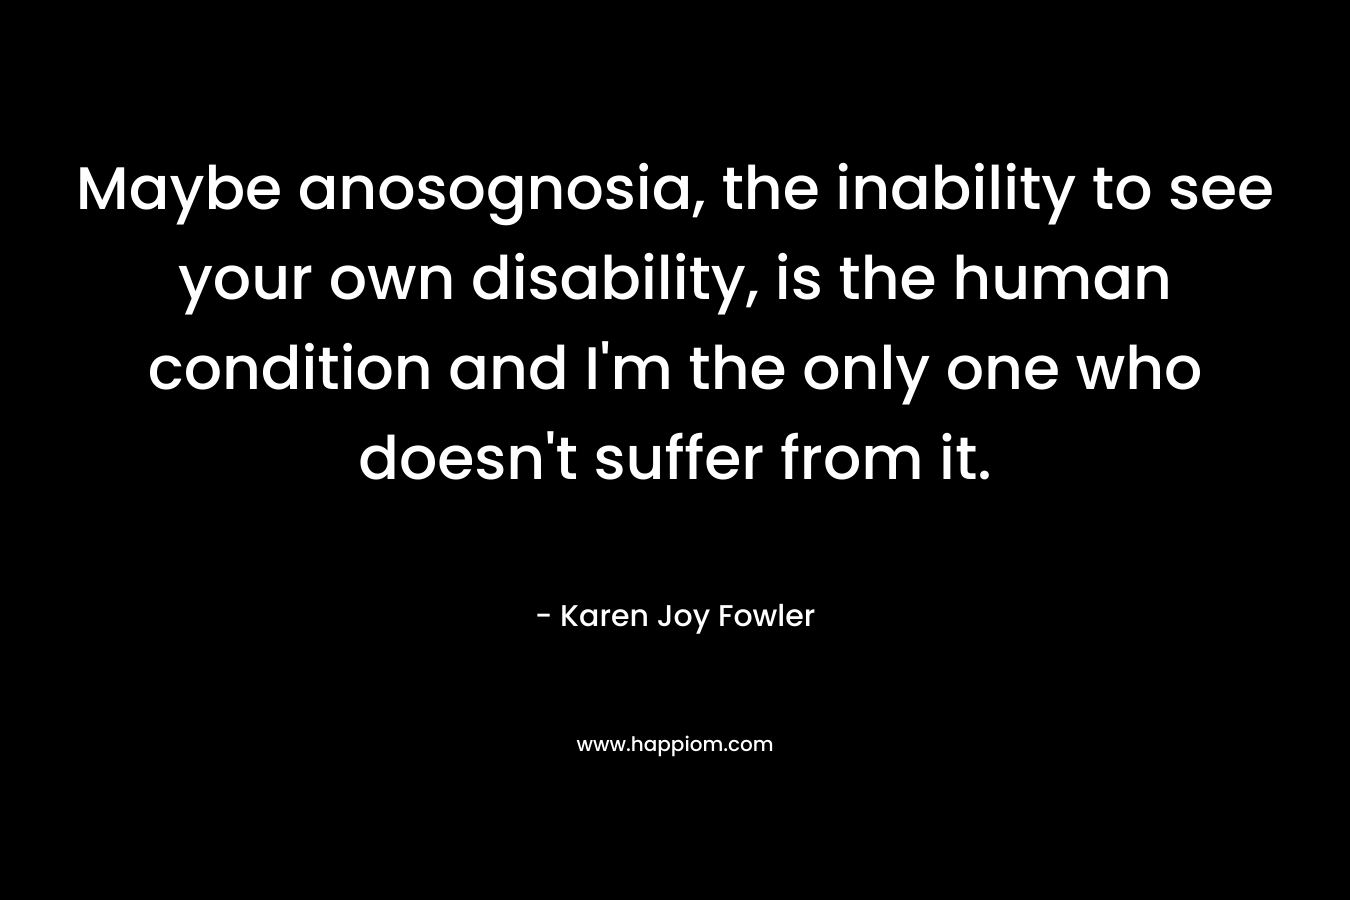 Maybe anosognosia, the inability to see your own disability, is the human condition and I’m the only one who doesn’t suffer from it. – Karen Joy Fowler